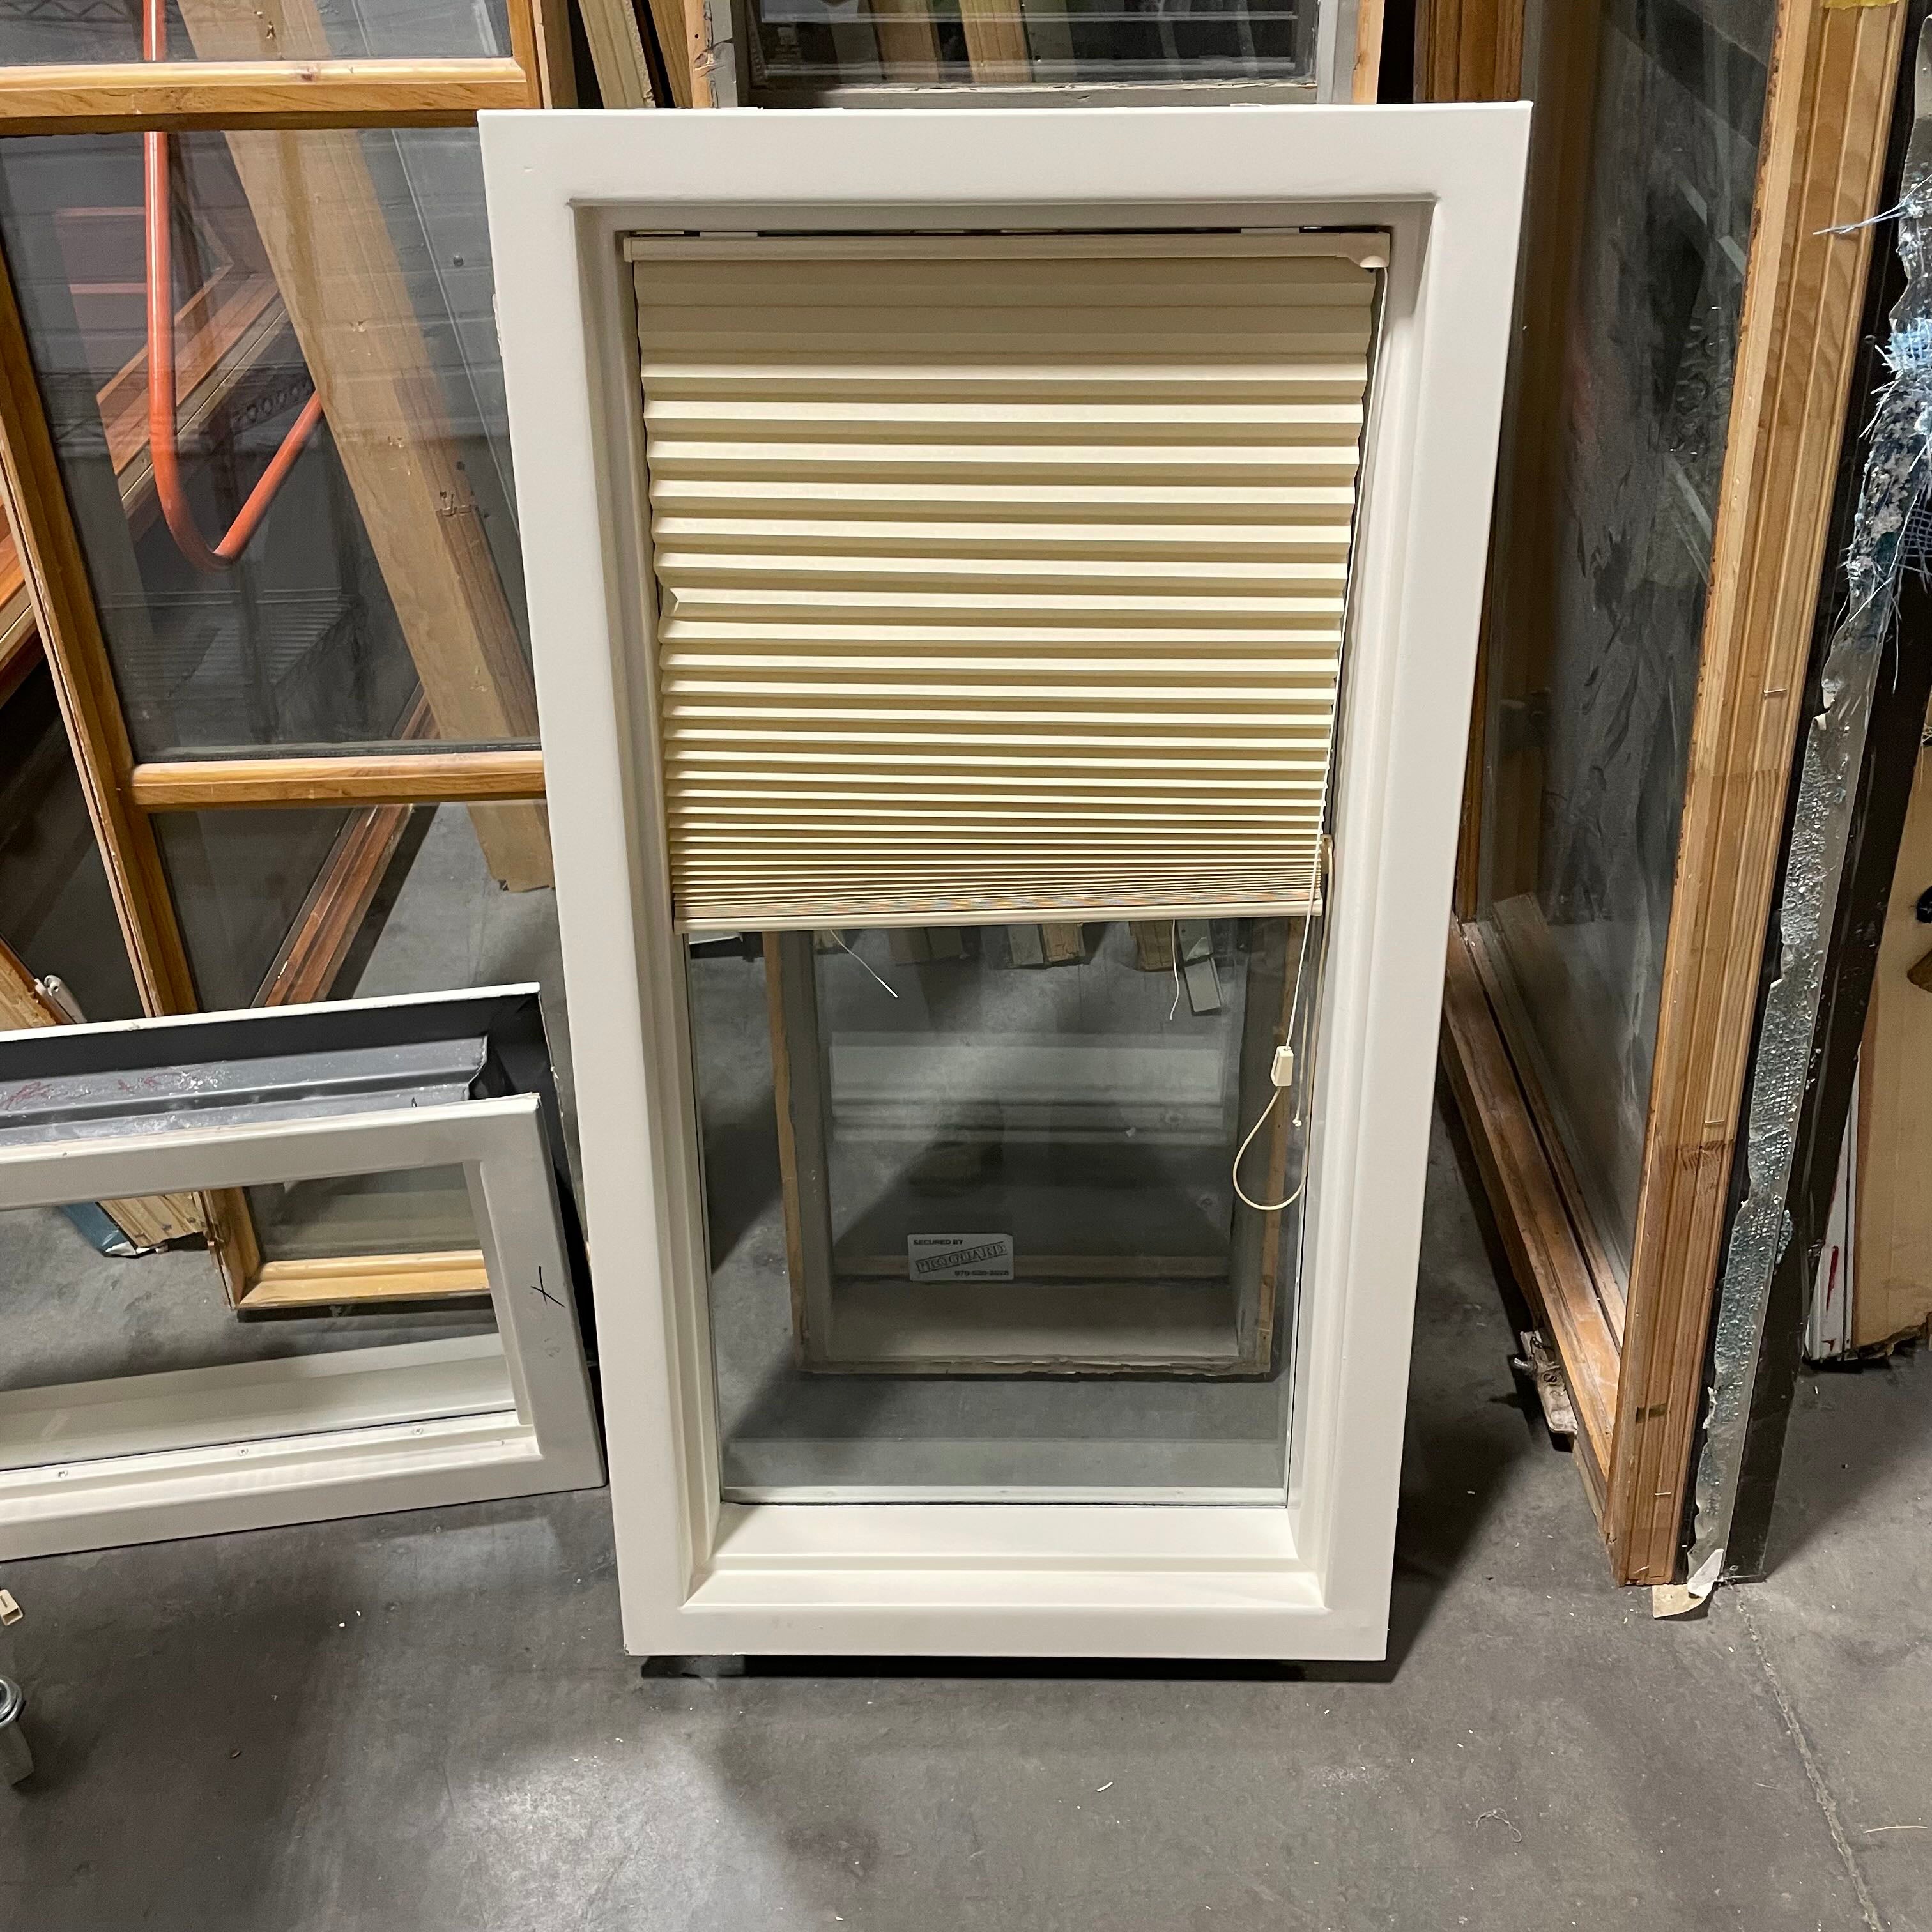 24"x 45"x 6.25" Painted White Metal Both Sides Fixed Exterior Window